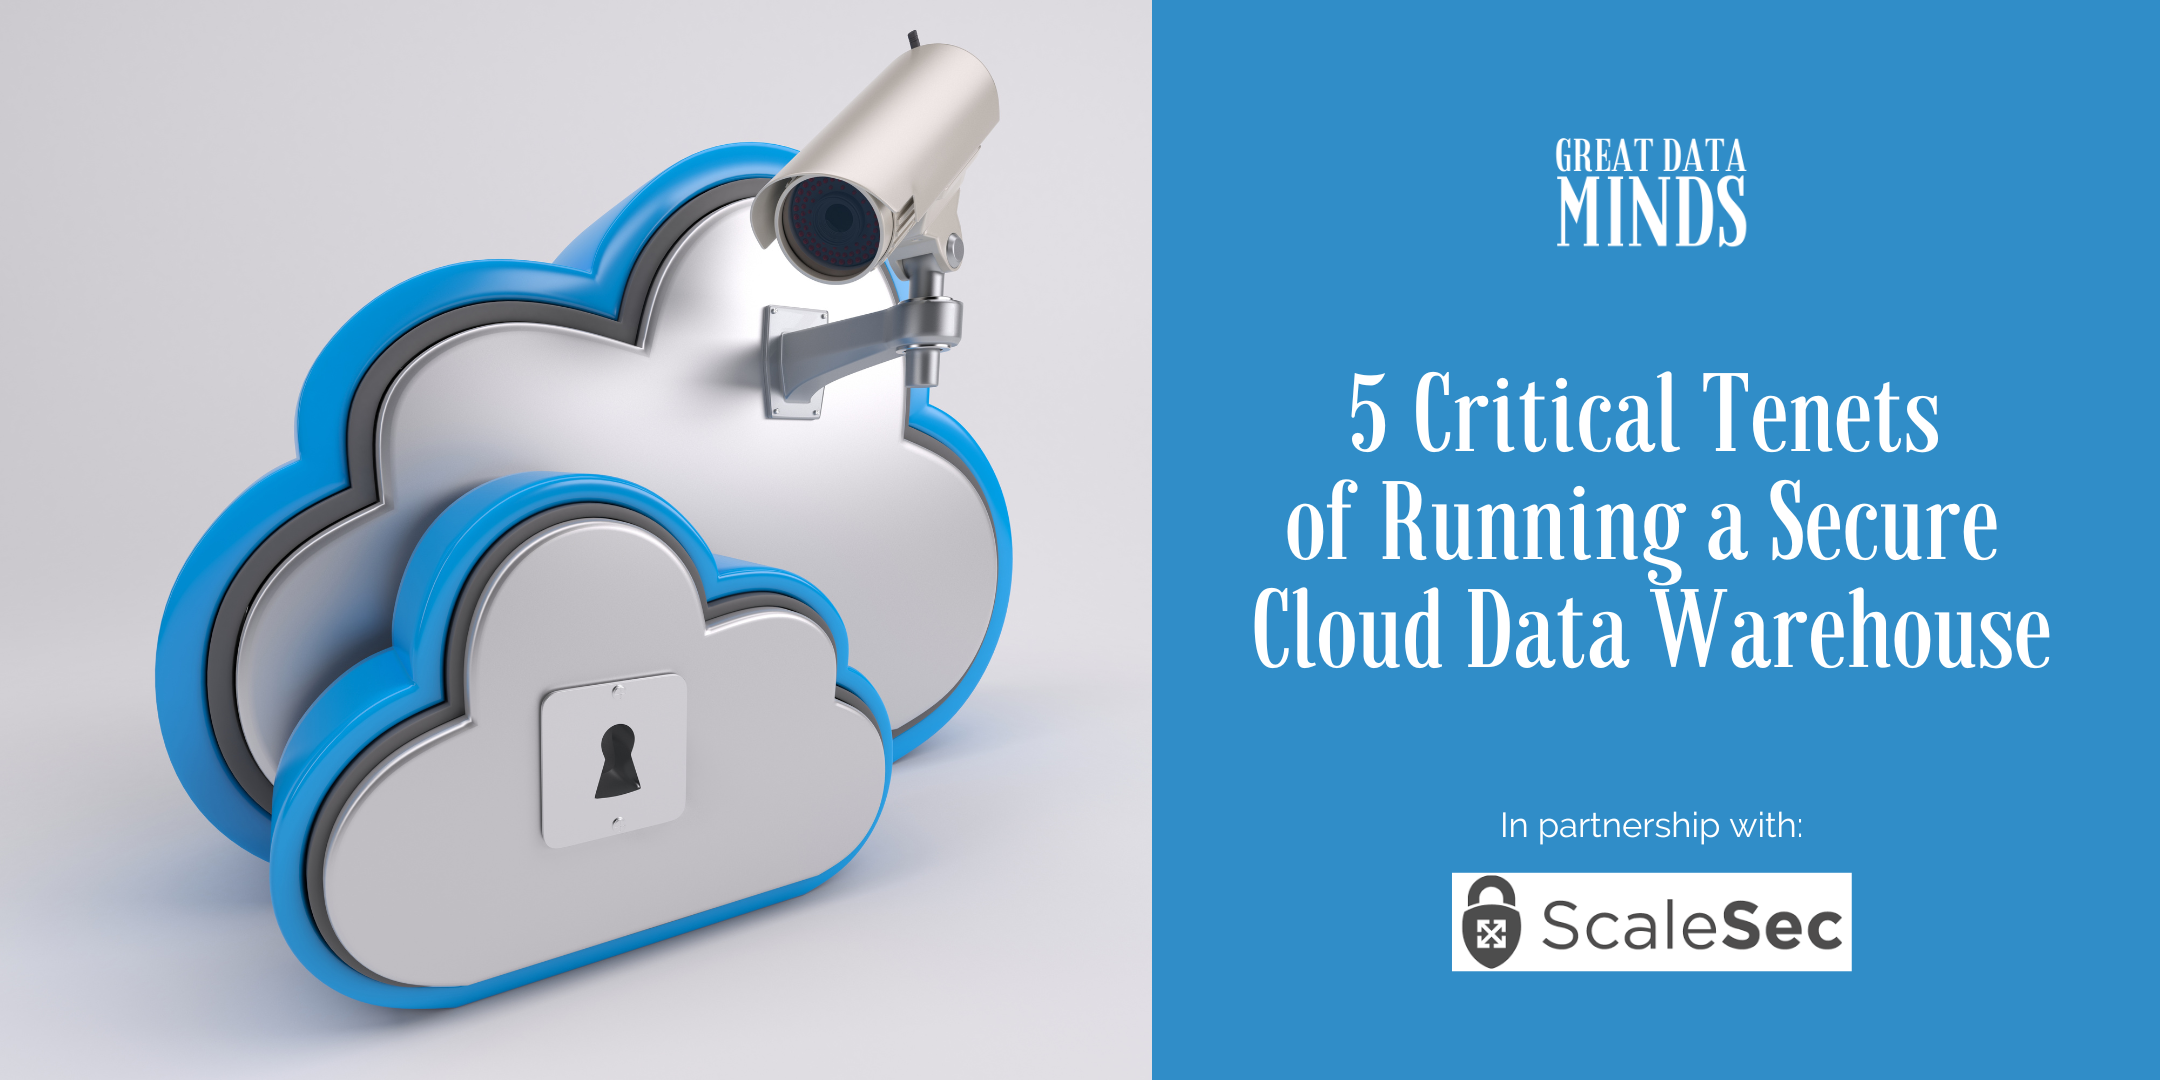 5 Critical Tenets for a Secure Cloud Data Warehouse